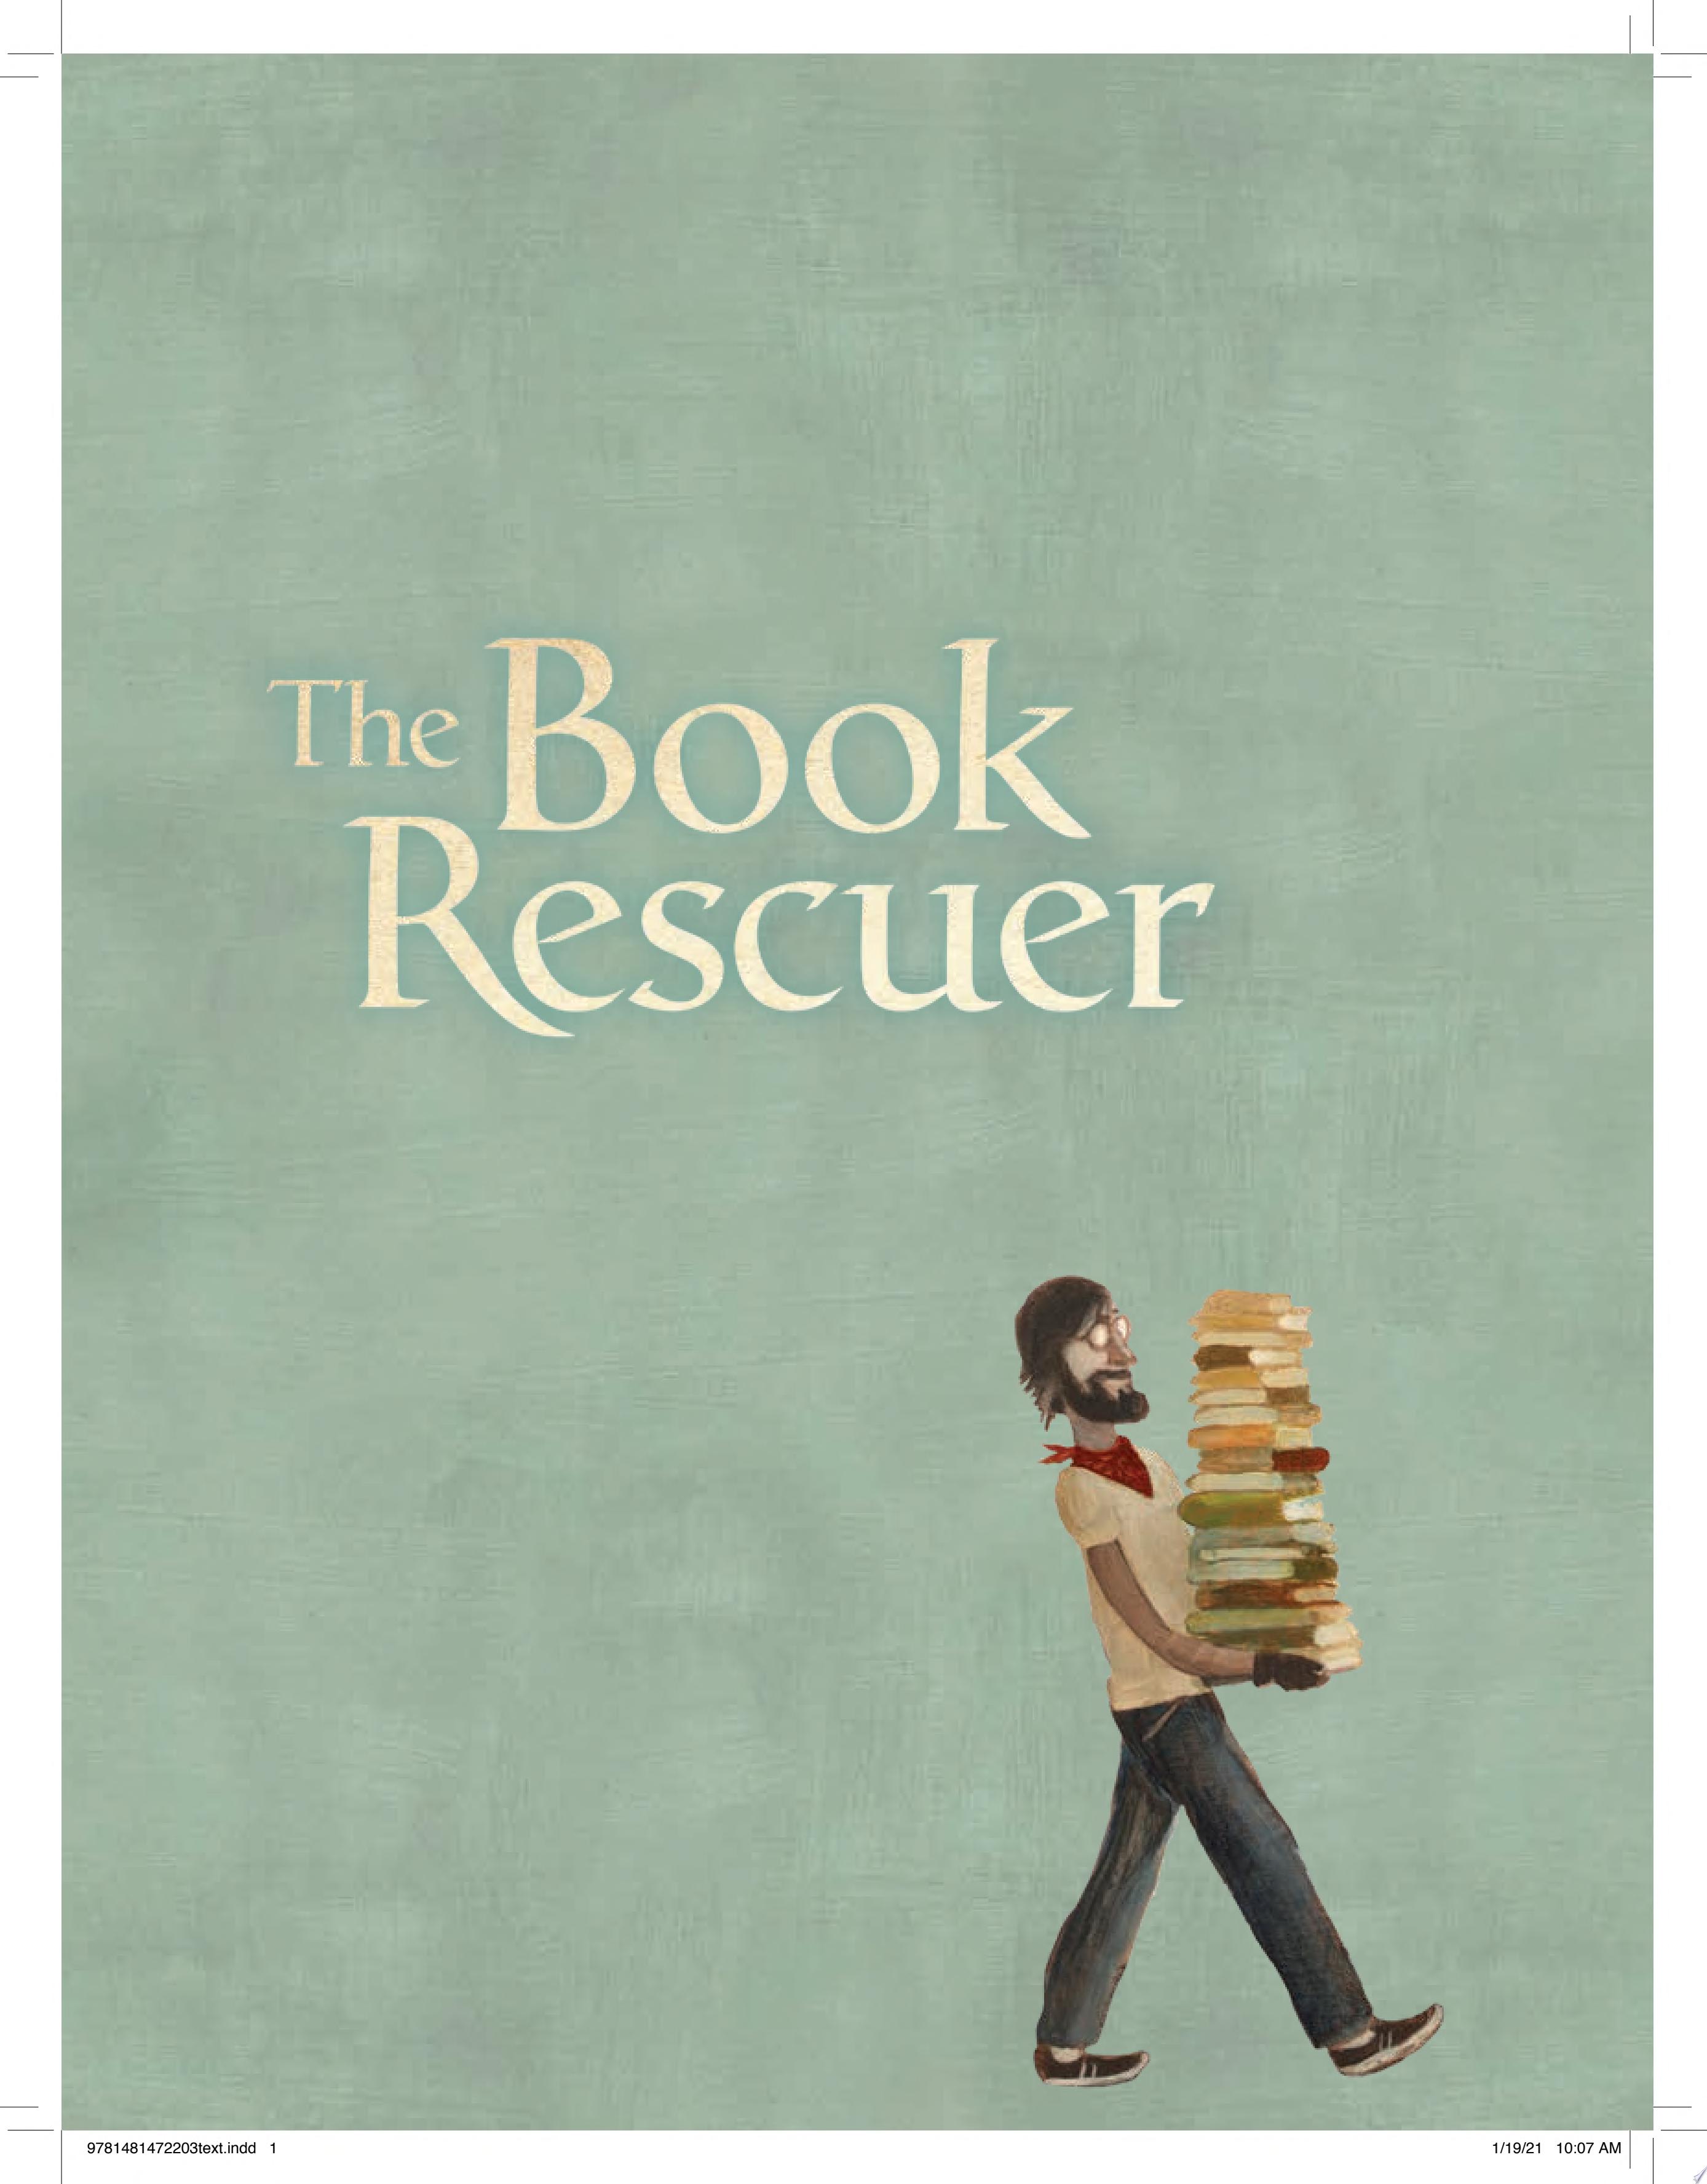 Image for "The Book Rescuer"